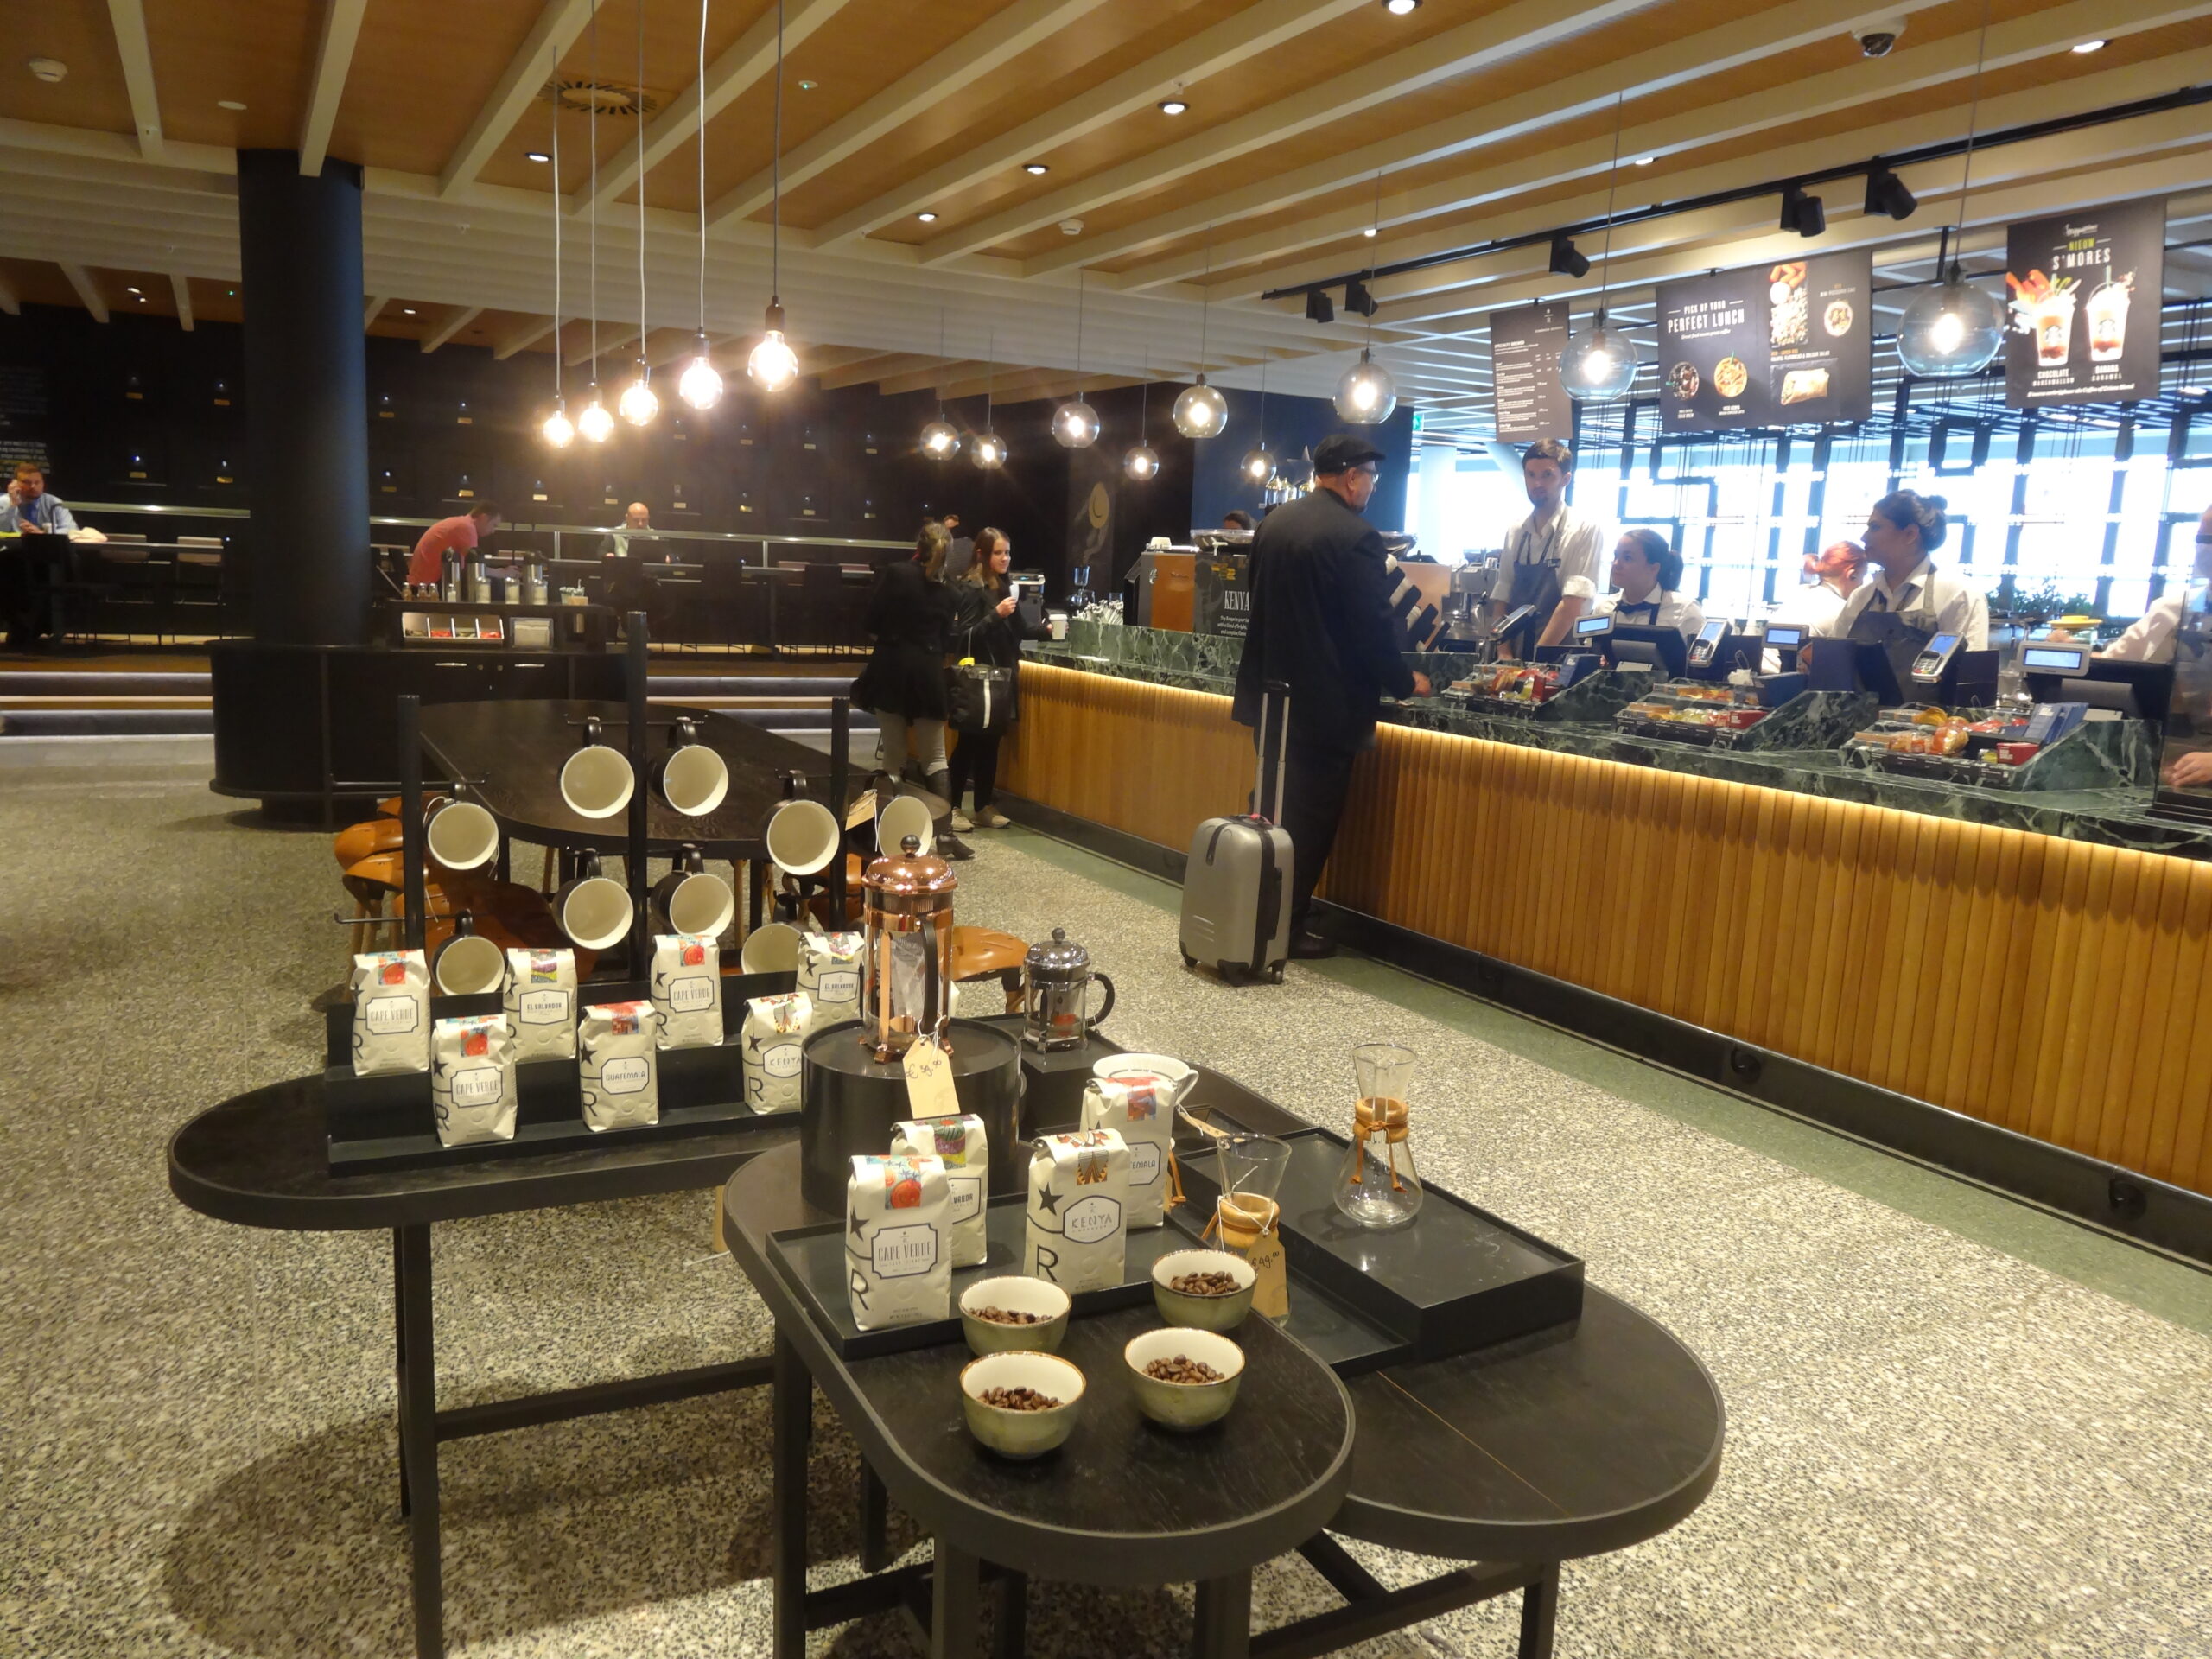 Barista breakthrough: Starbucks Reserve selection, presented beautifully in pods on the back wall, is a highlight of the coffee brand's newest concept, brought to life in Lounge 2 by HMSHost